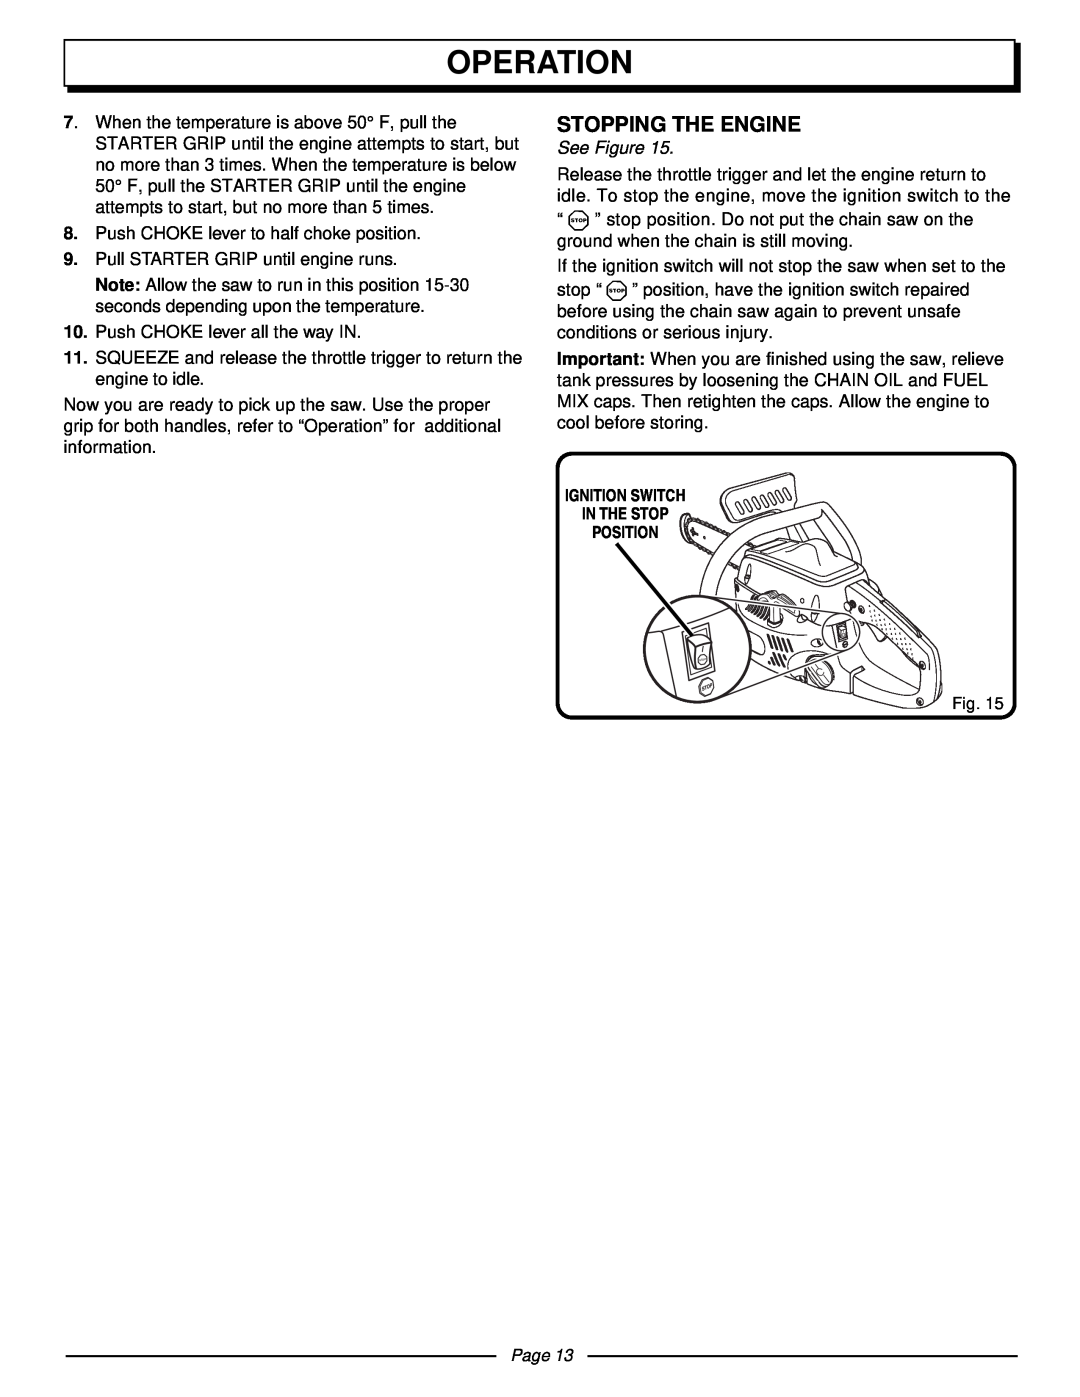 Homelite UT10510 manual Stopping The Engine, Operation, See Figure, Page 